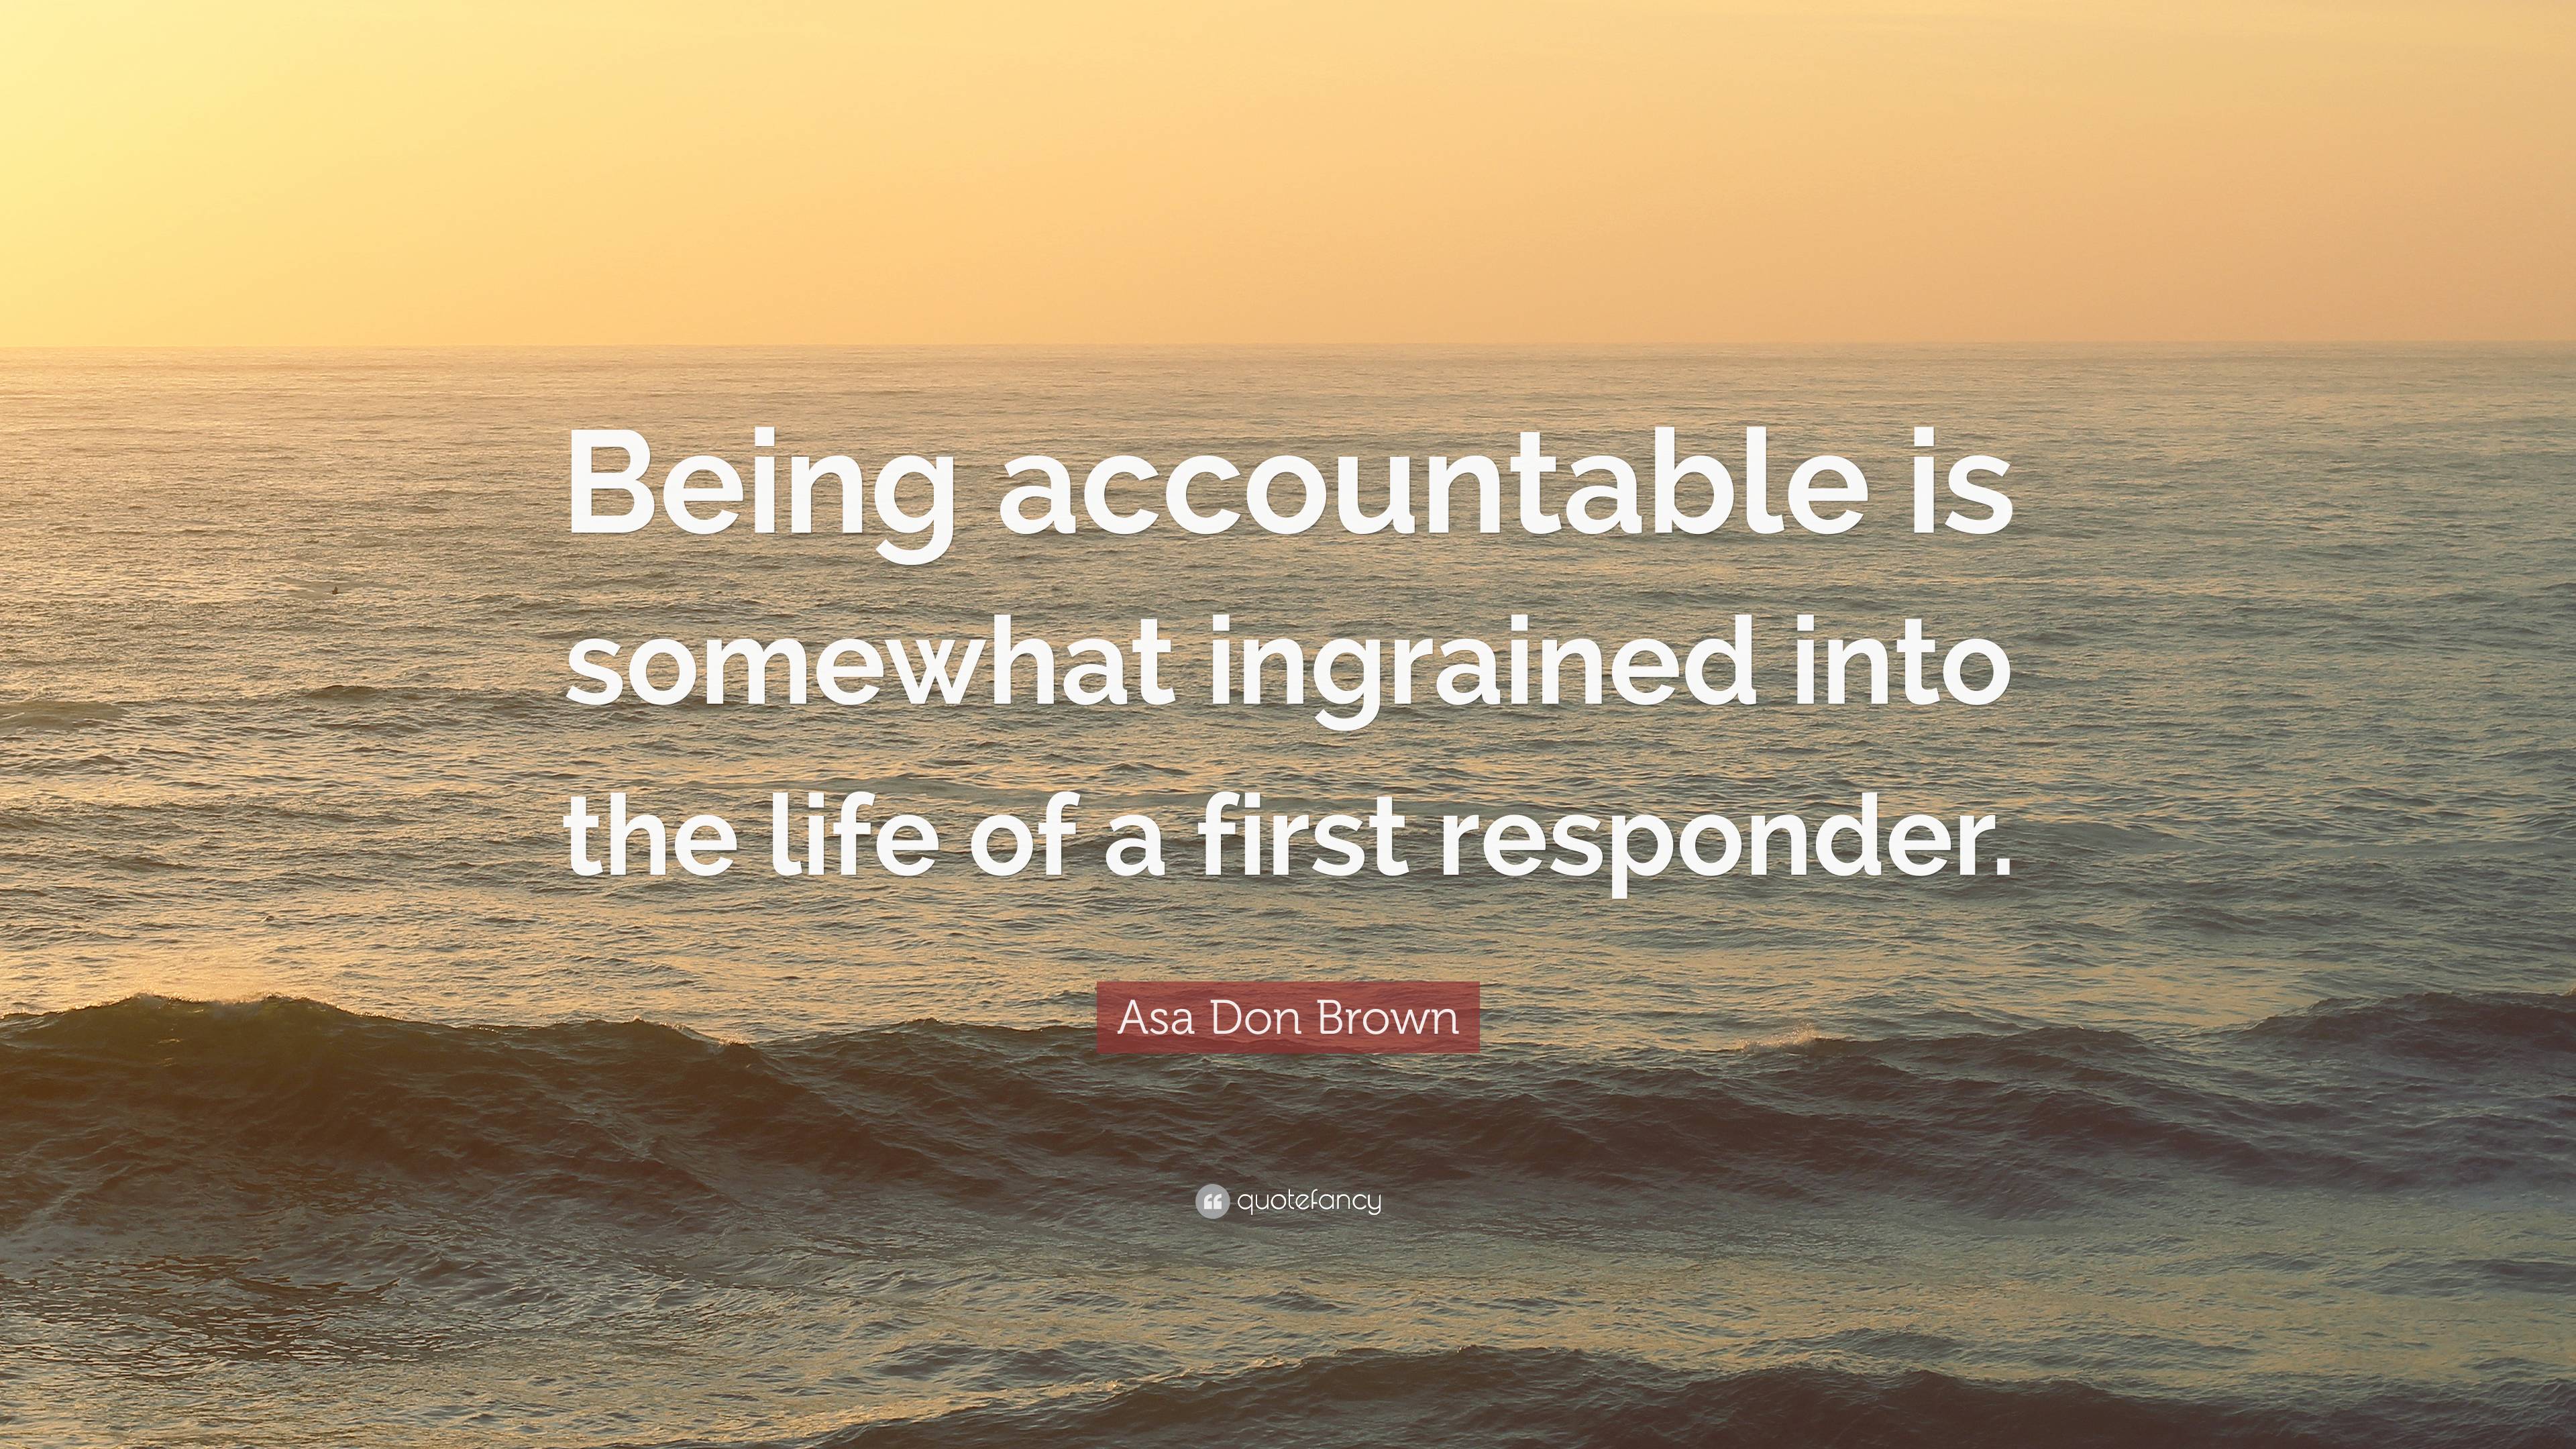 Asa Don Brown Quote: “Being accountable is somewhat ingrained into the ...